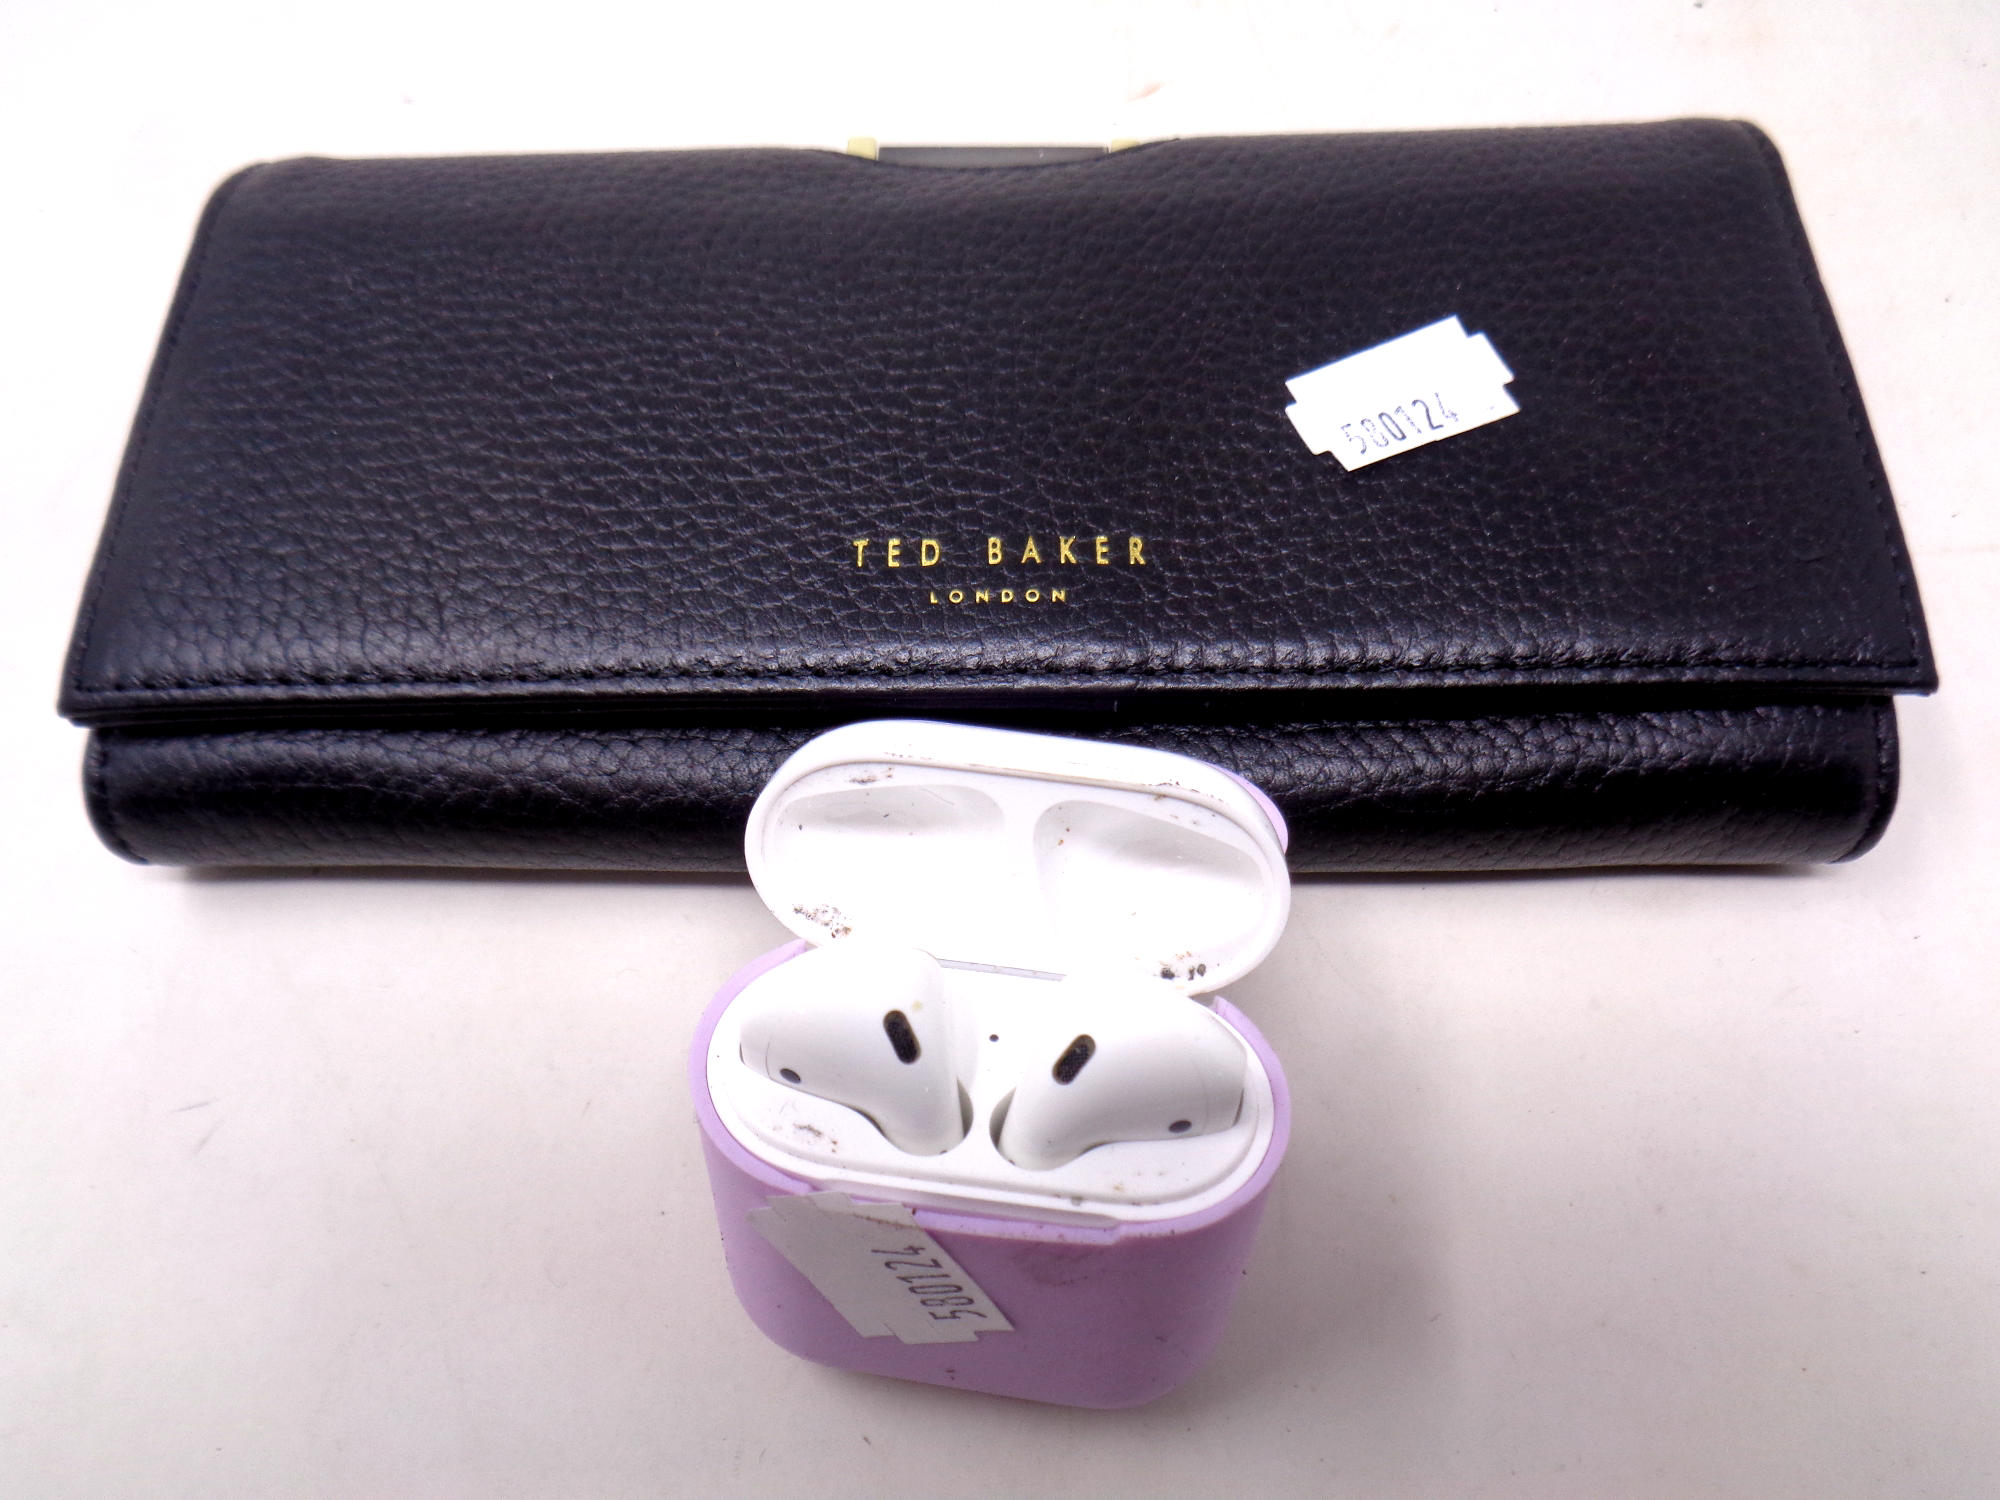 A Ted Baker black leather purse together with a pair of Apple air pods